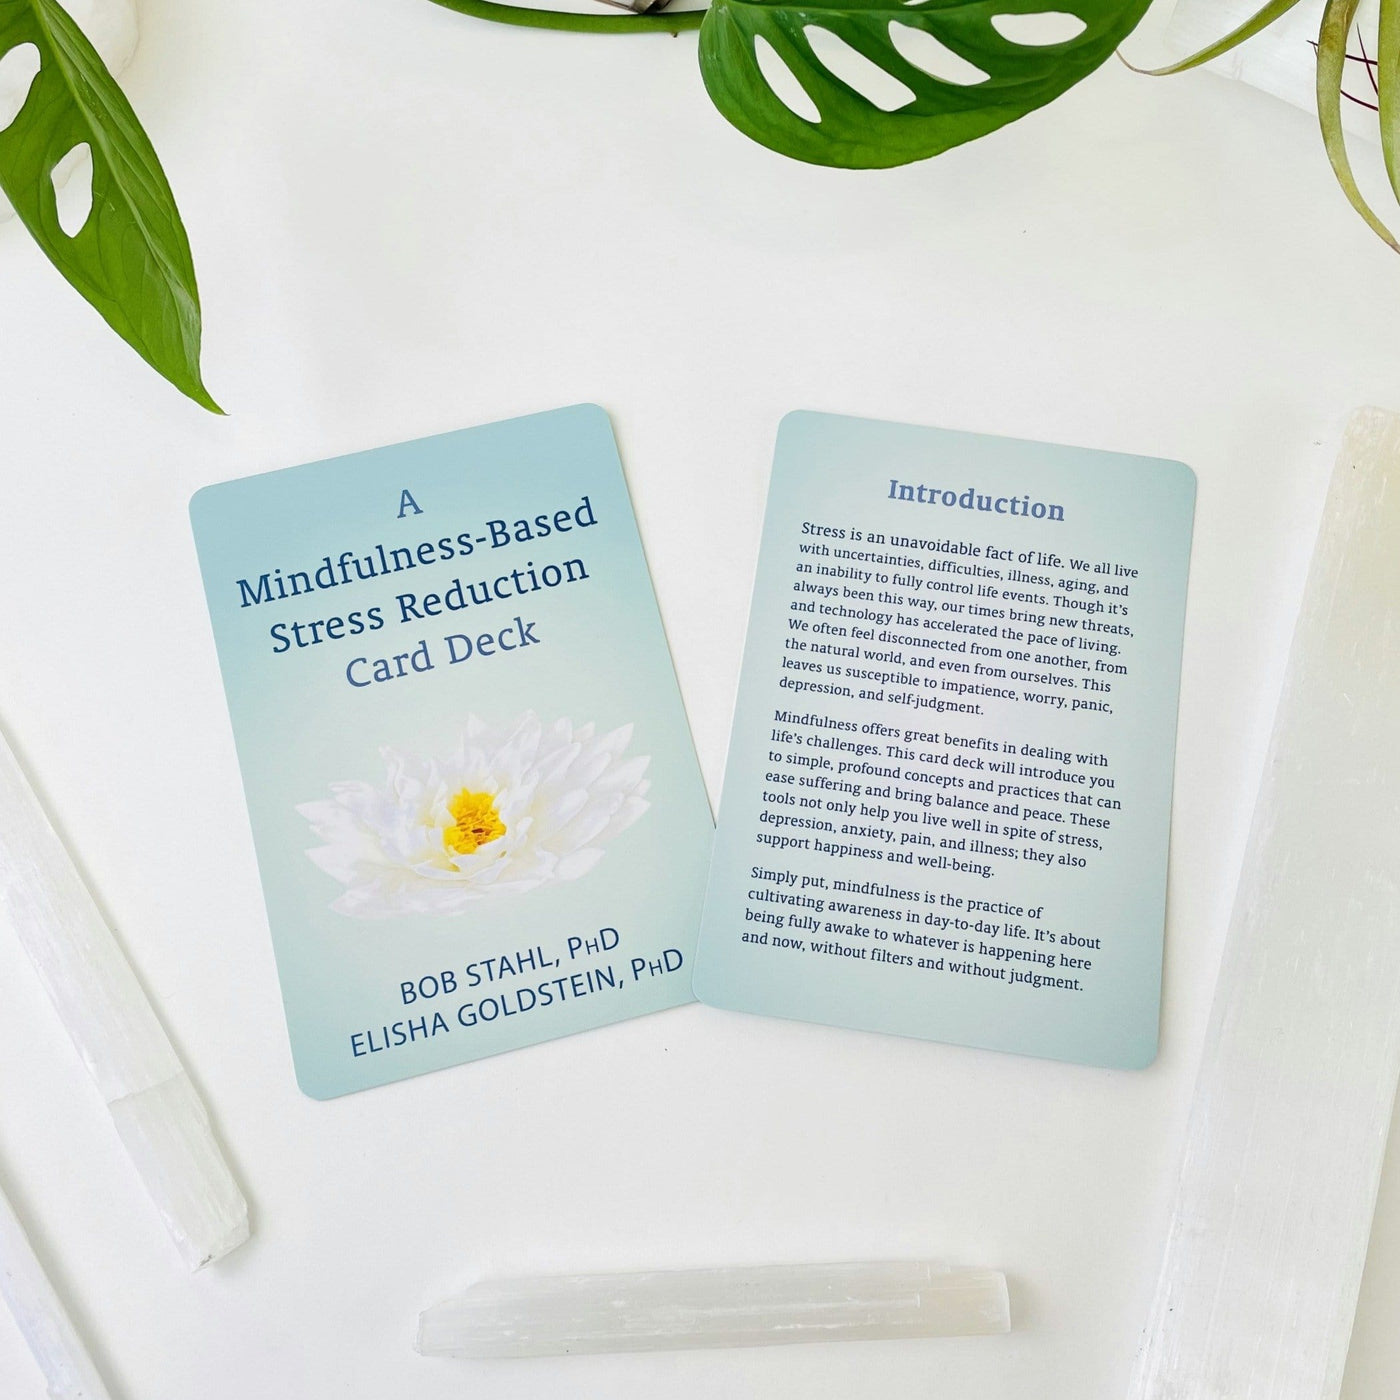 A Mindfulness-Based Stress Reduction Card Deck - Title and introduction card in an alter.